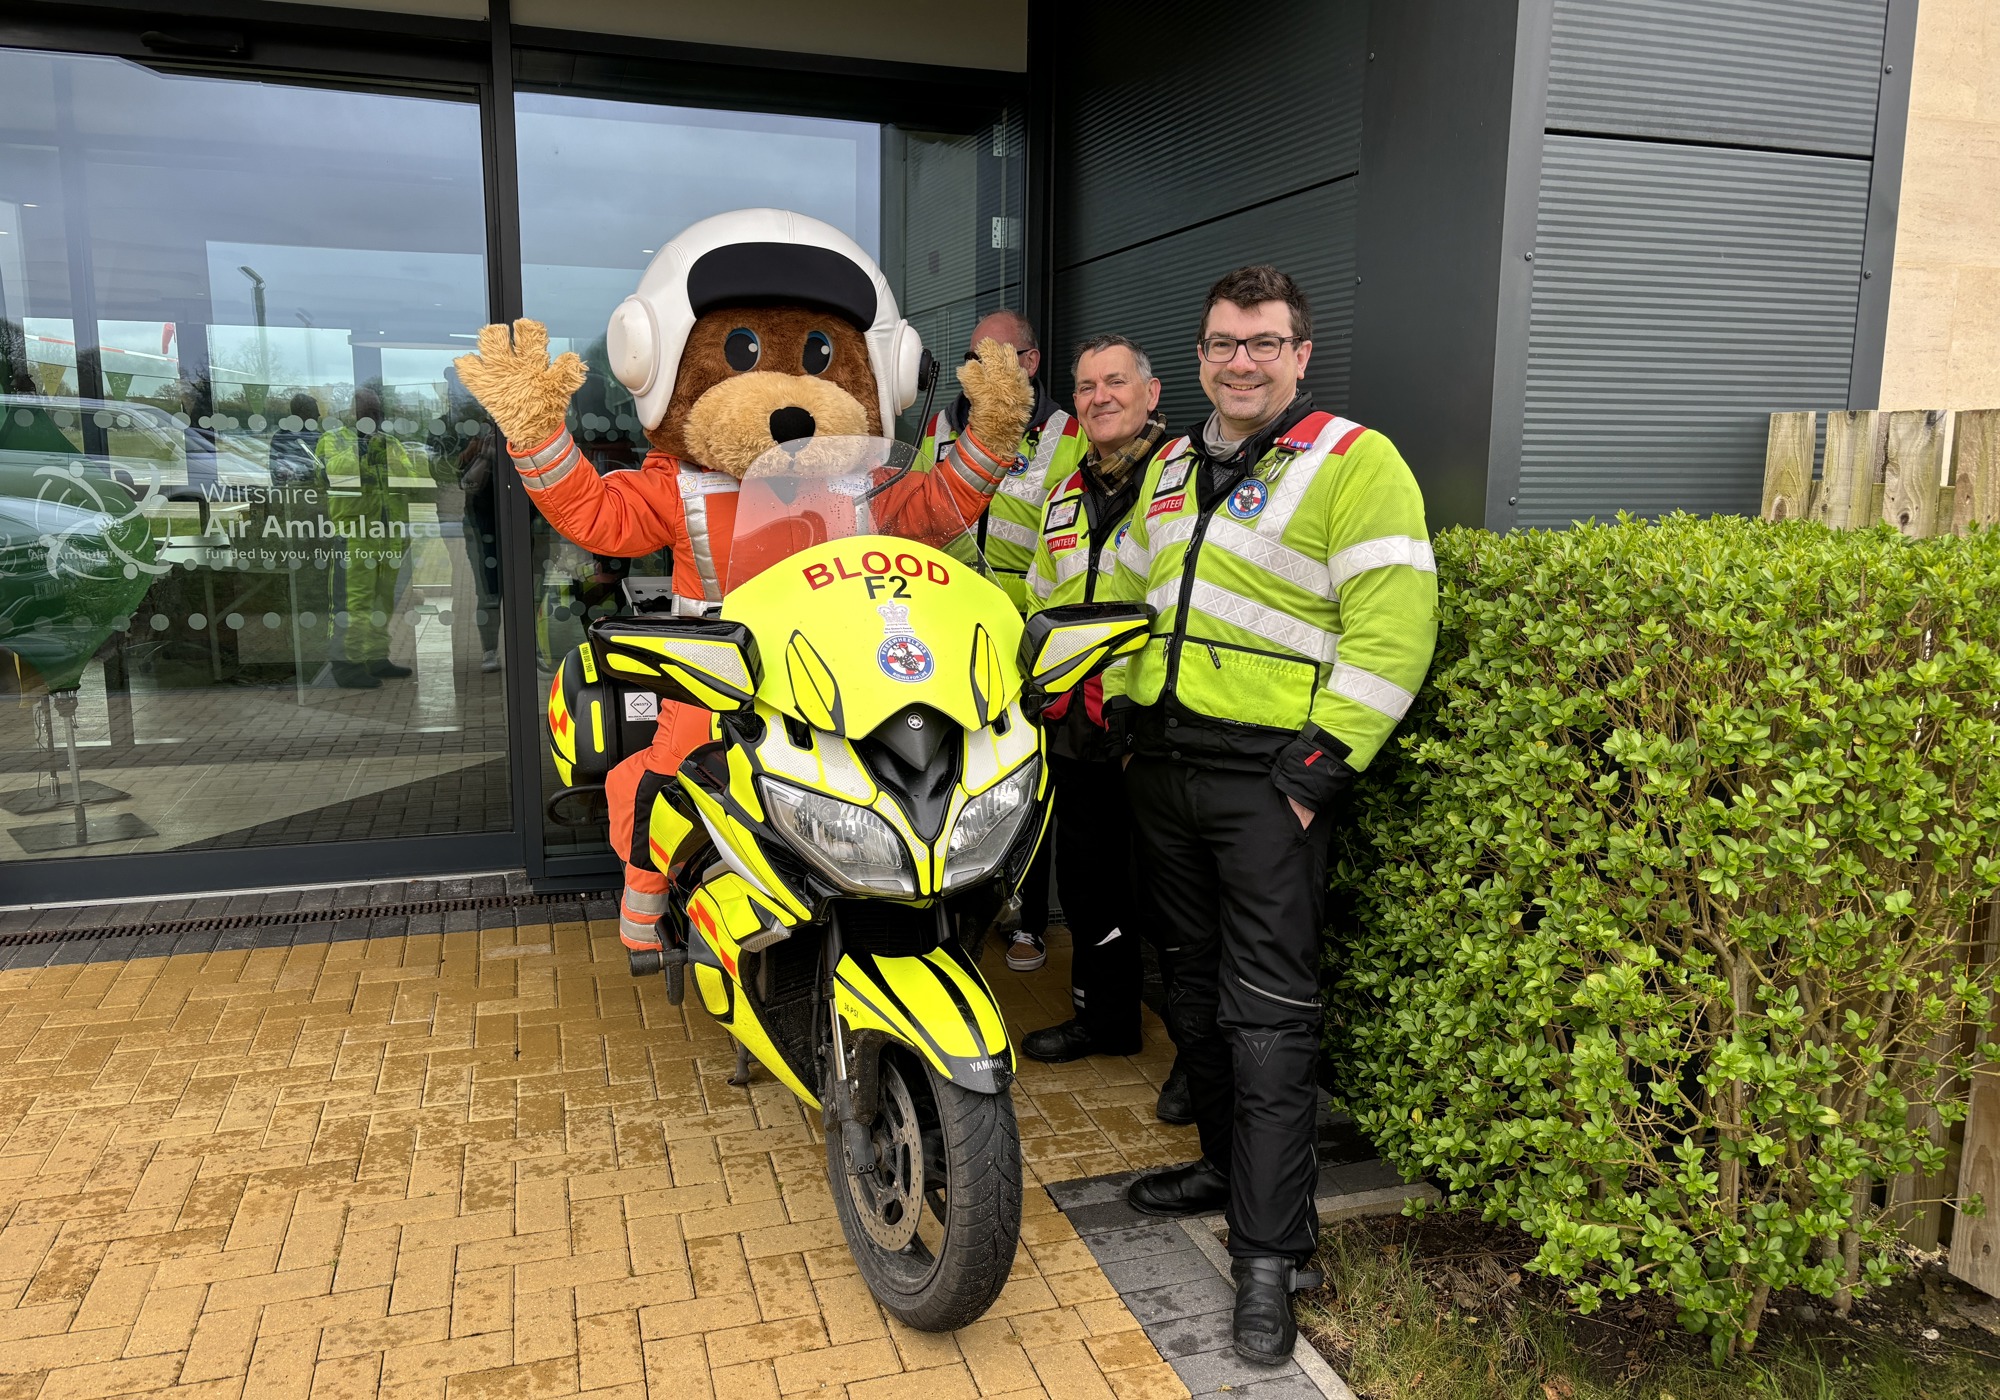 A paramedic bear mascot on a blood bike, with three other blood bikers posing